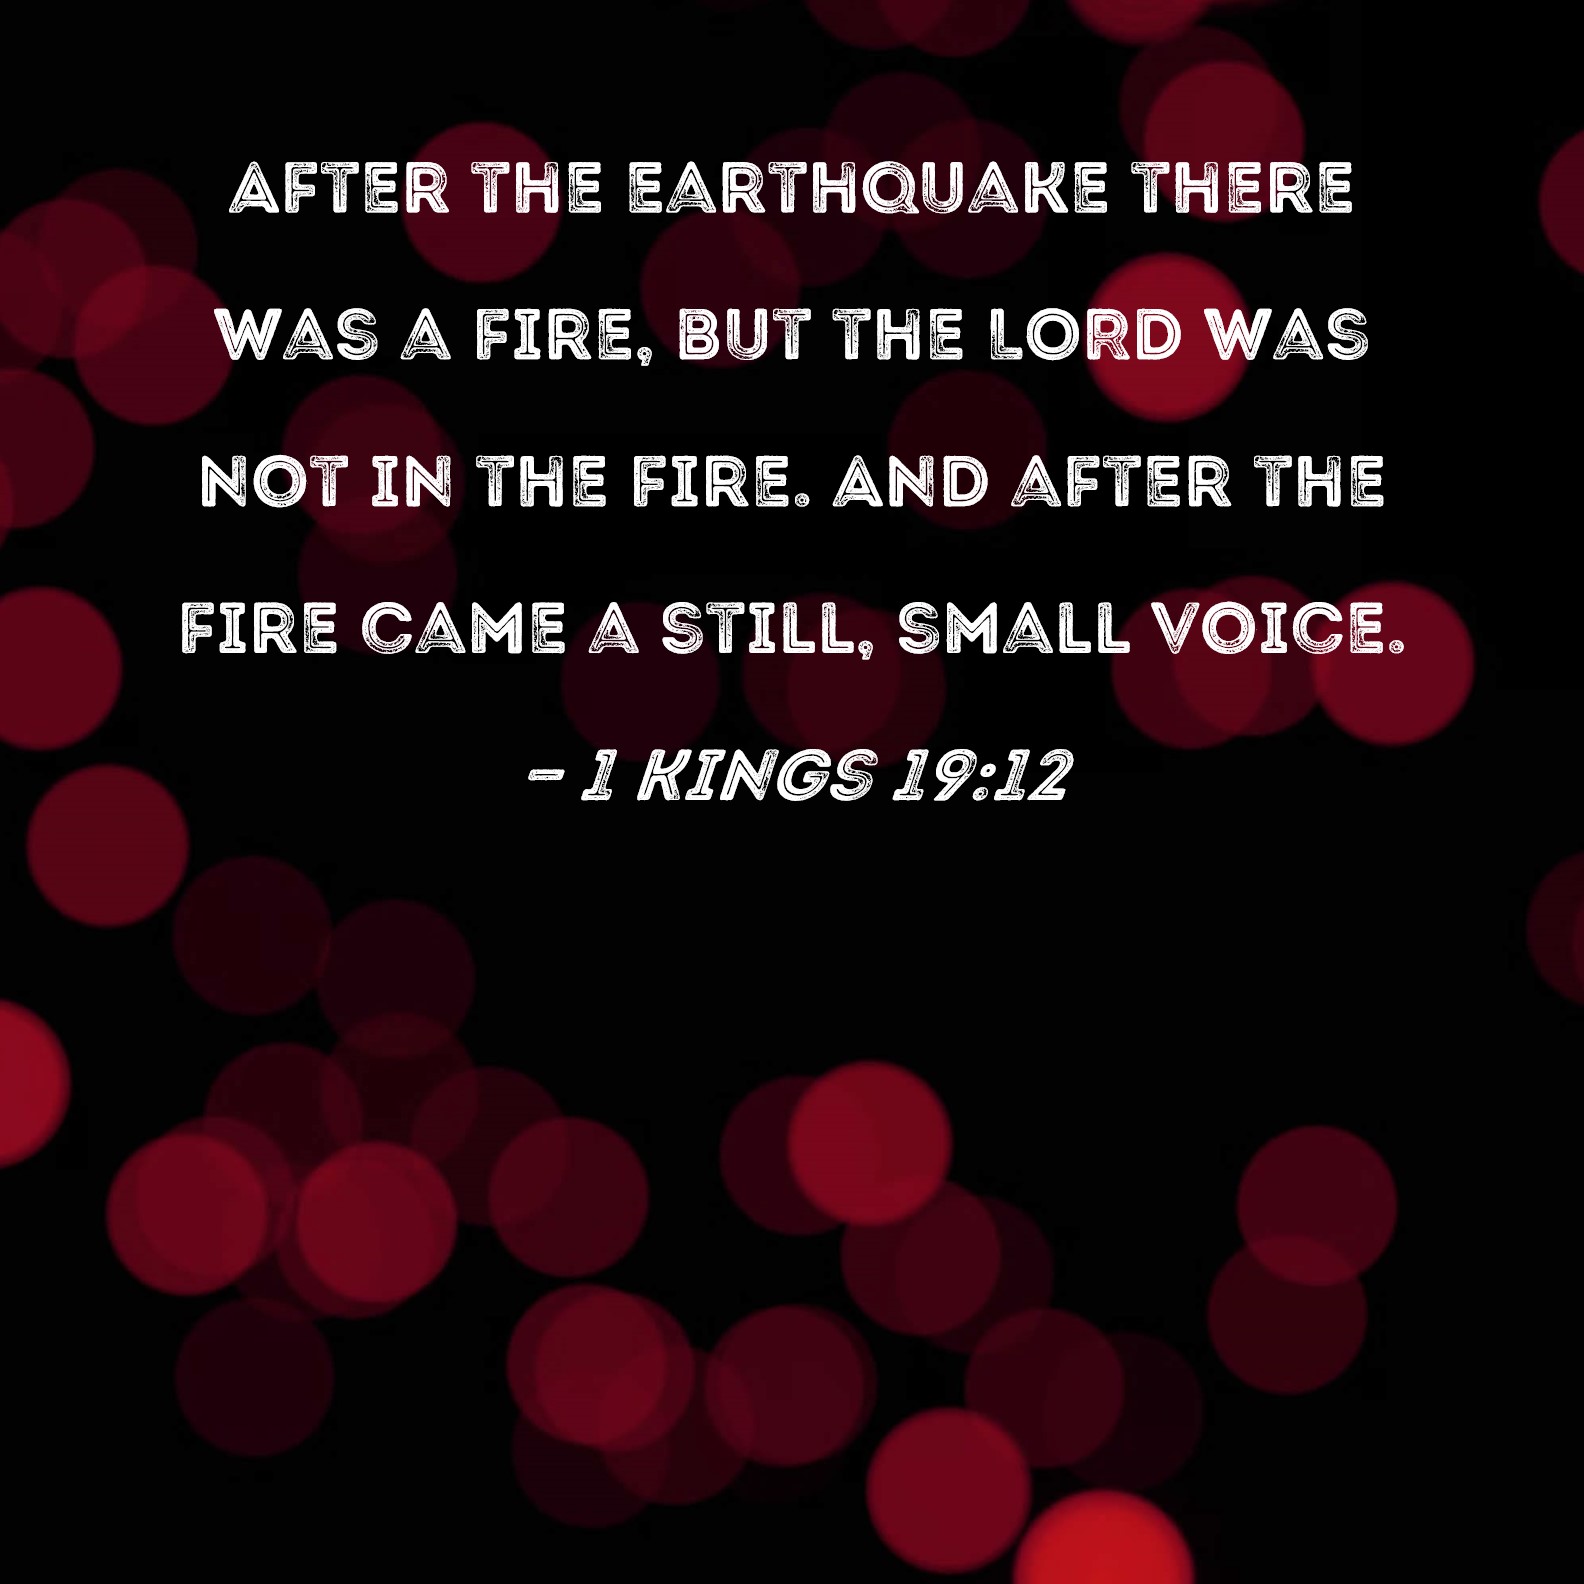 1 Kings 19:12 After the earthquake there was a fire, but the LORD was not  in the fire. And after the fire came a still, small voice.